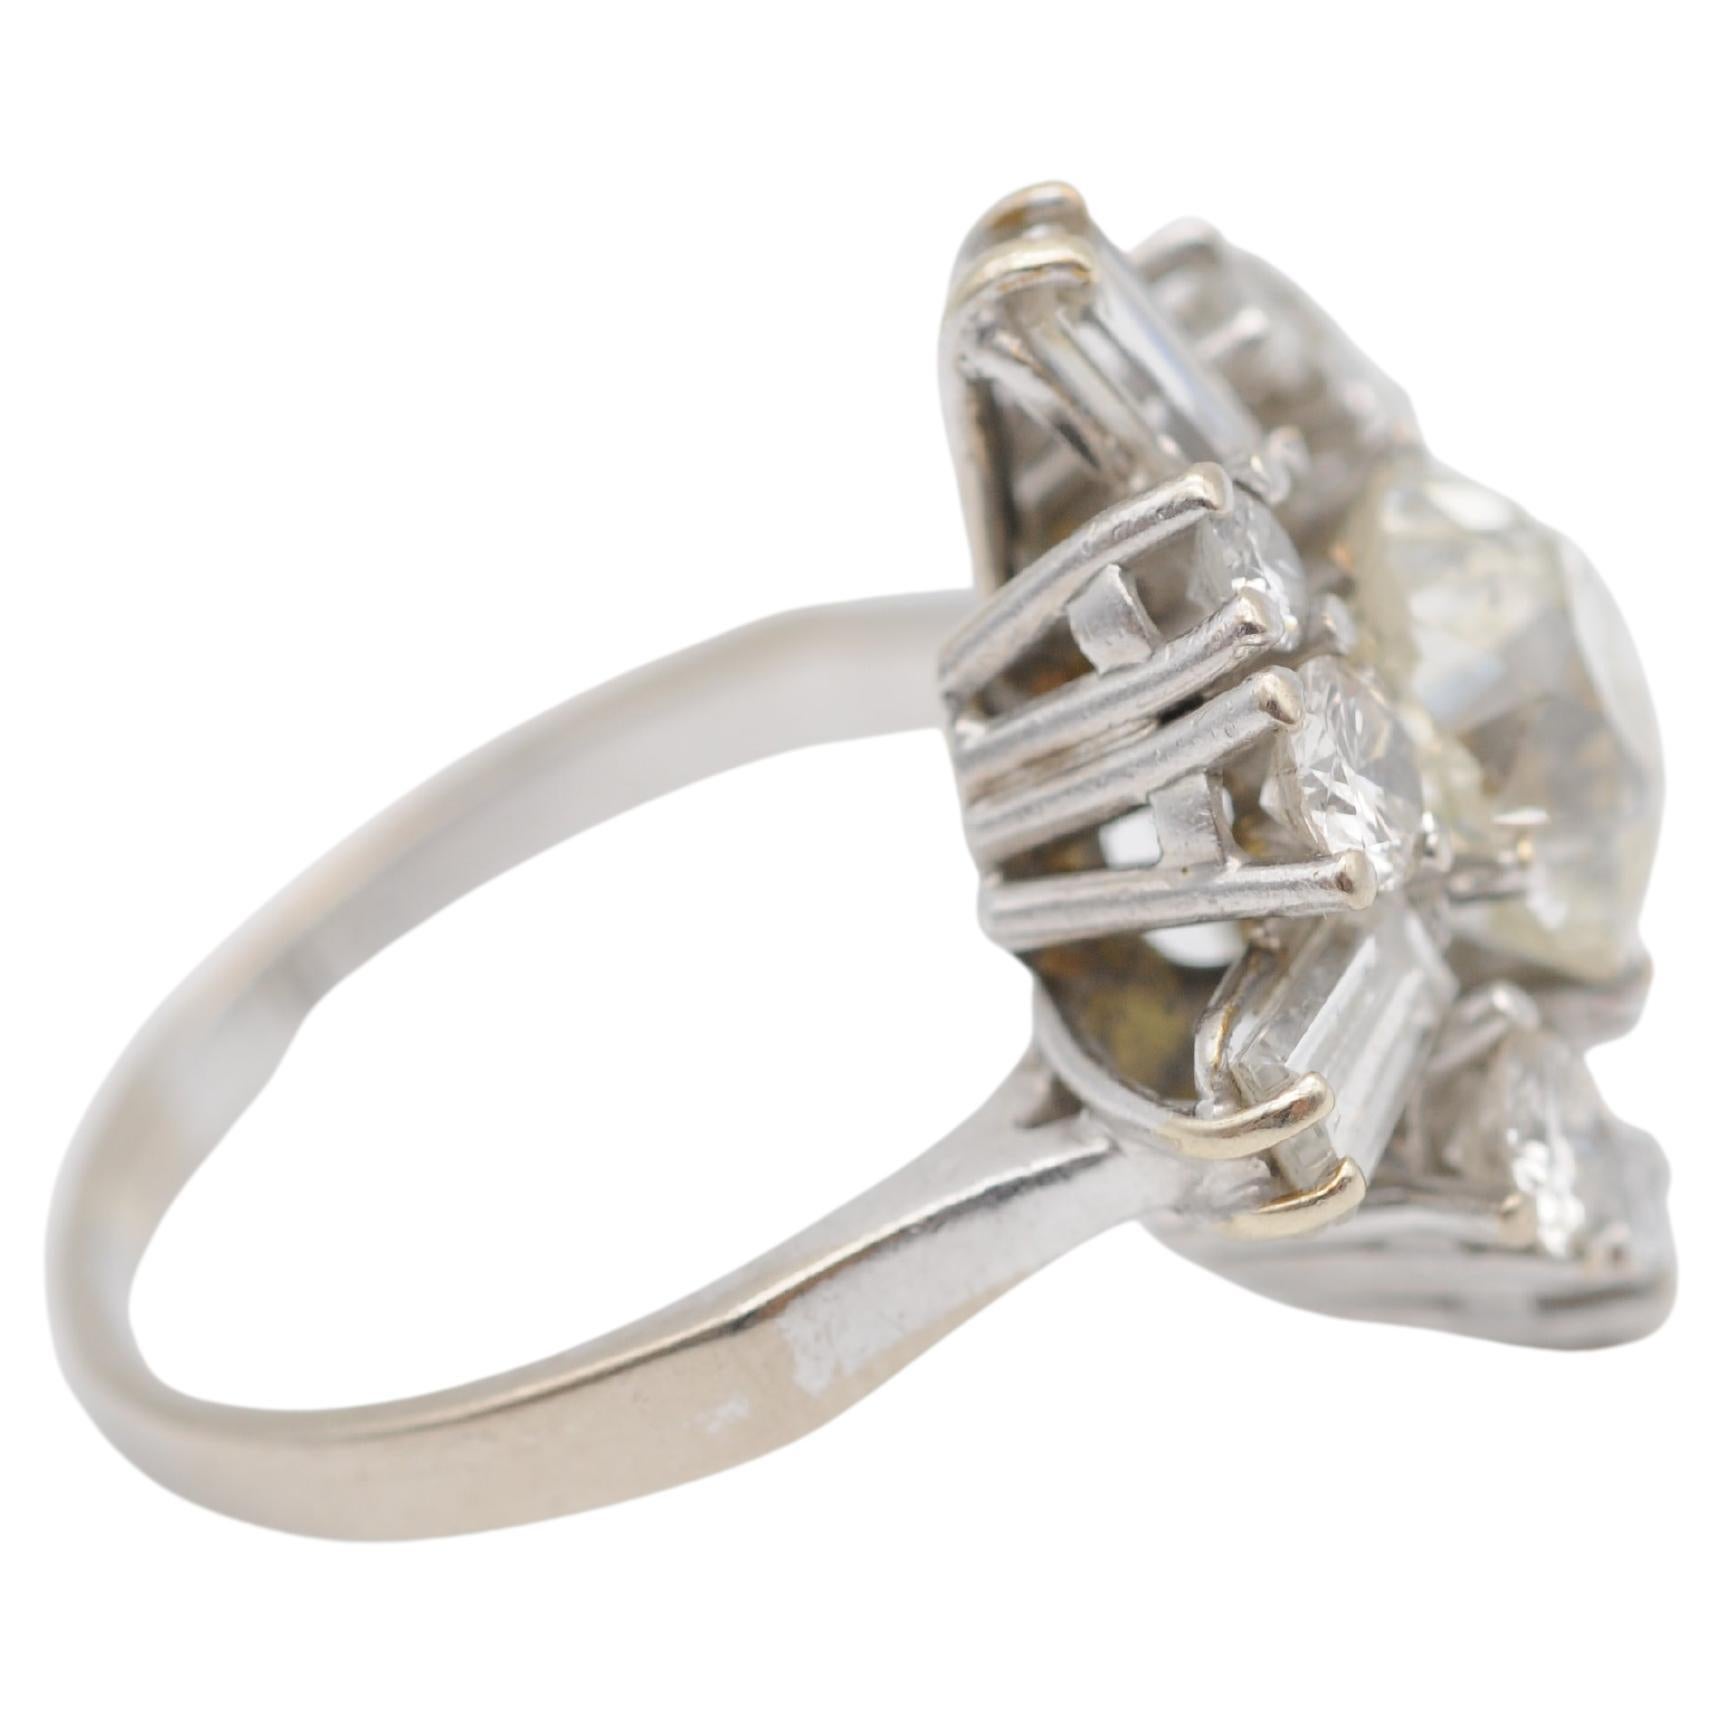 Behold the epitome of luxury and elegance - an exquisite ring crafted from 18K white gold, featuring a stunning old European cut diamond of approximately 2 carats. The centerpiece is further embellished by a mesmerizing display of diamonds - 8